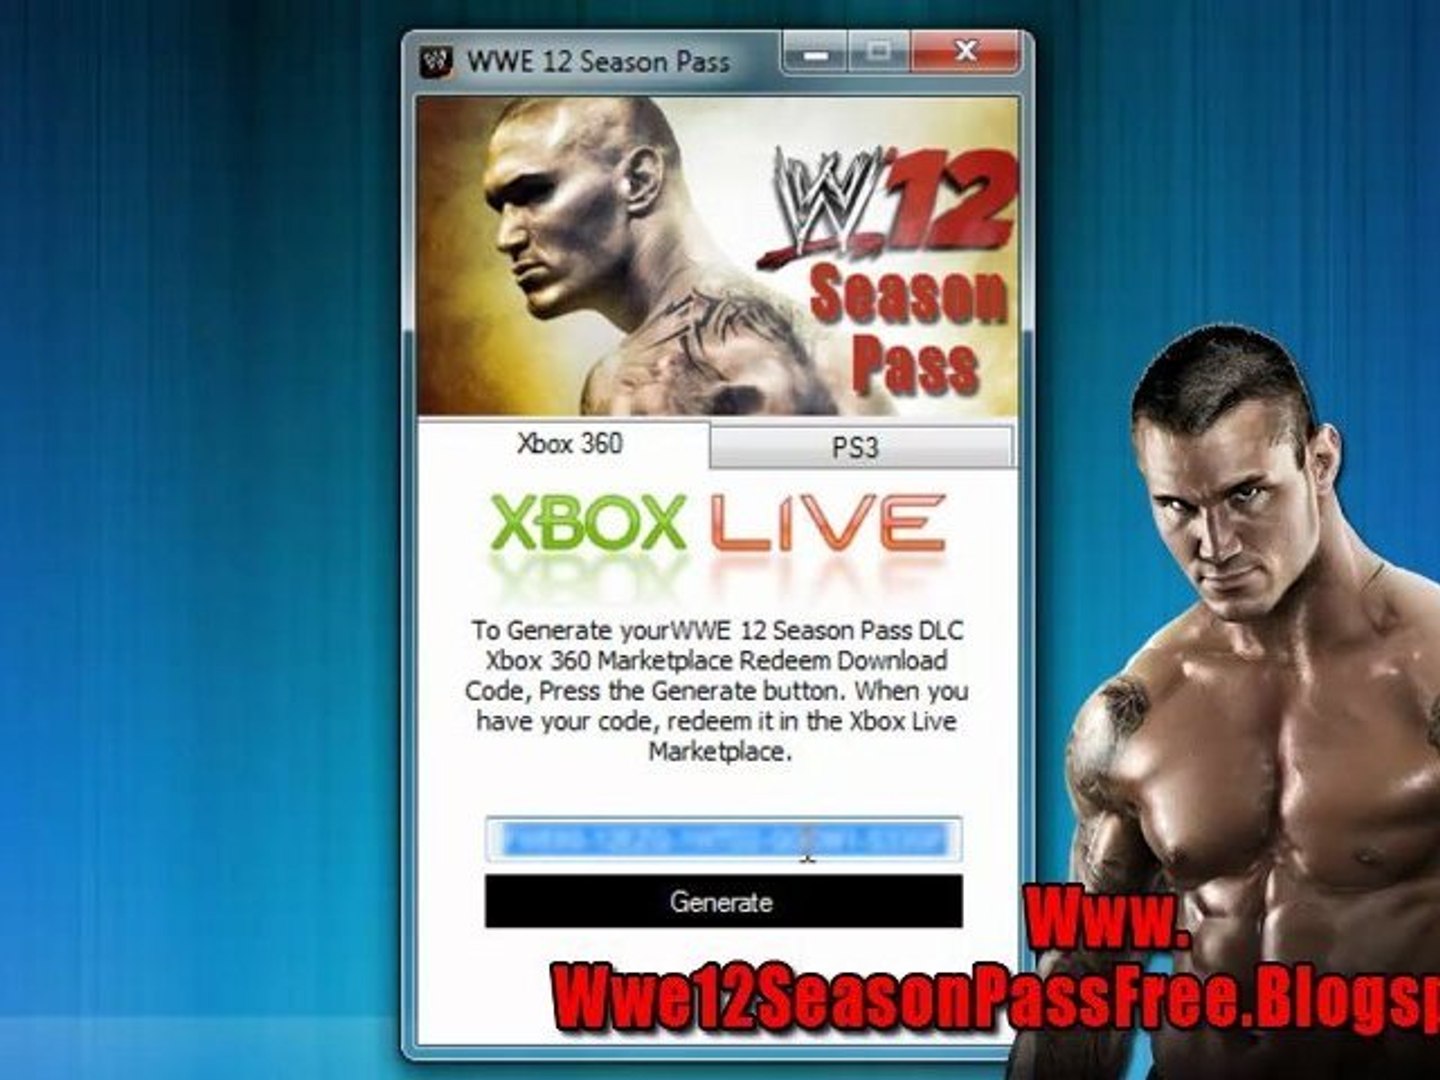 WWE 12 Season Pass Code Leaked - Download Free on Xbox 360 And PS3 - video  Dailymotion